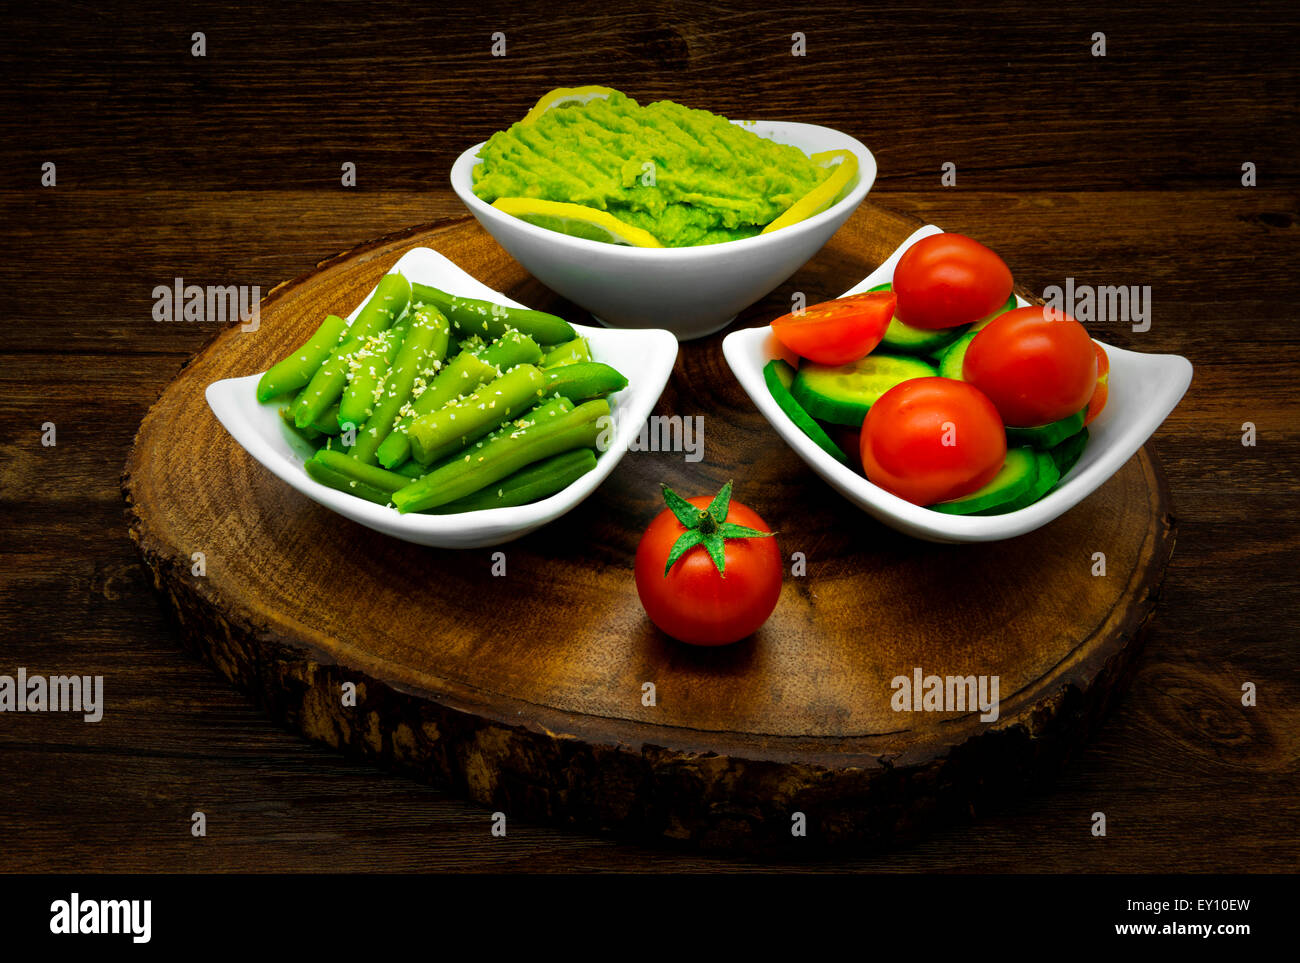 Vegetables on a dark wooden background. Salads, avocado, green beans. Stock Photo